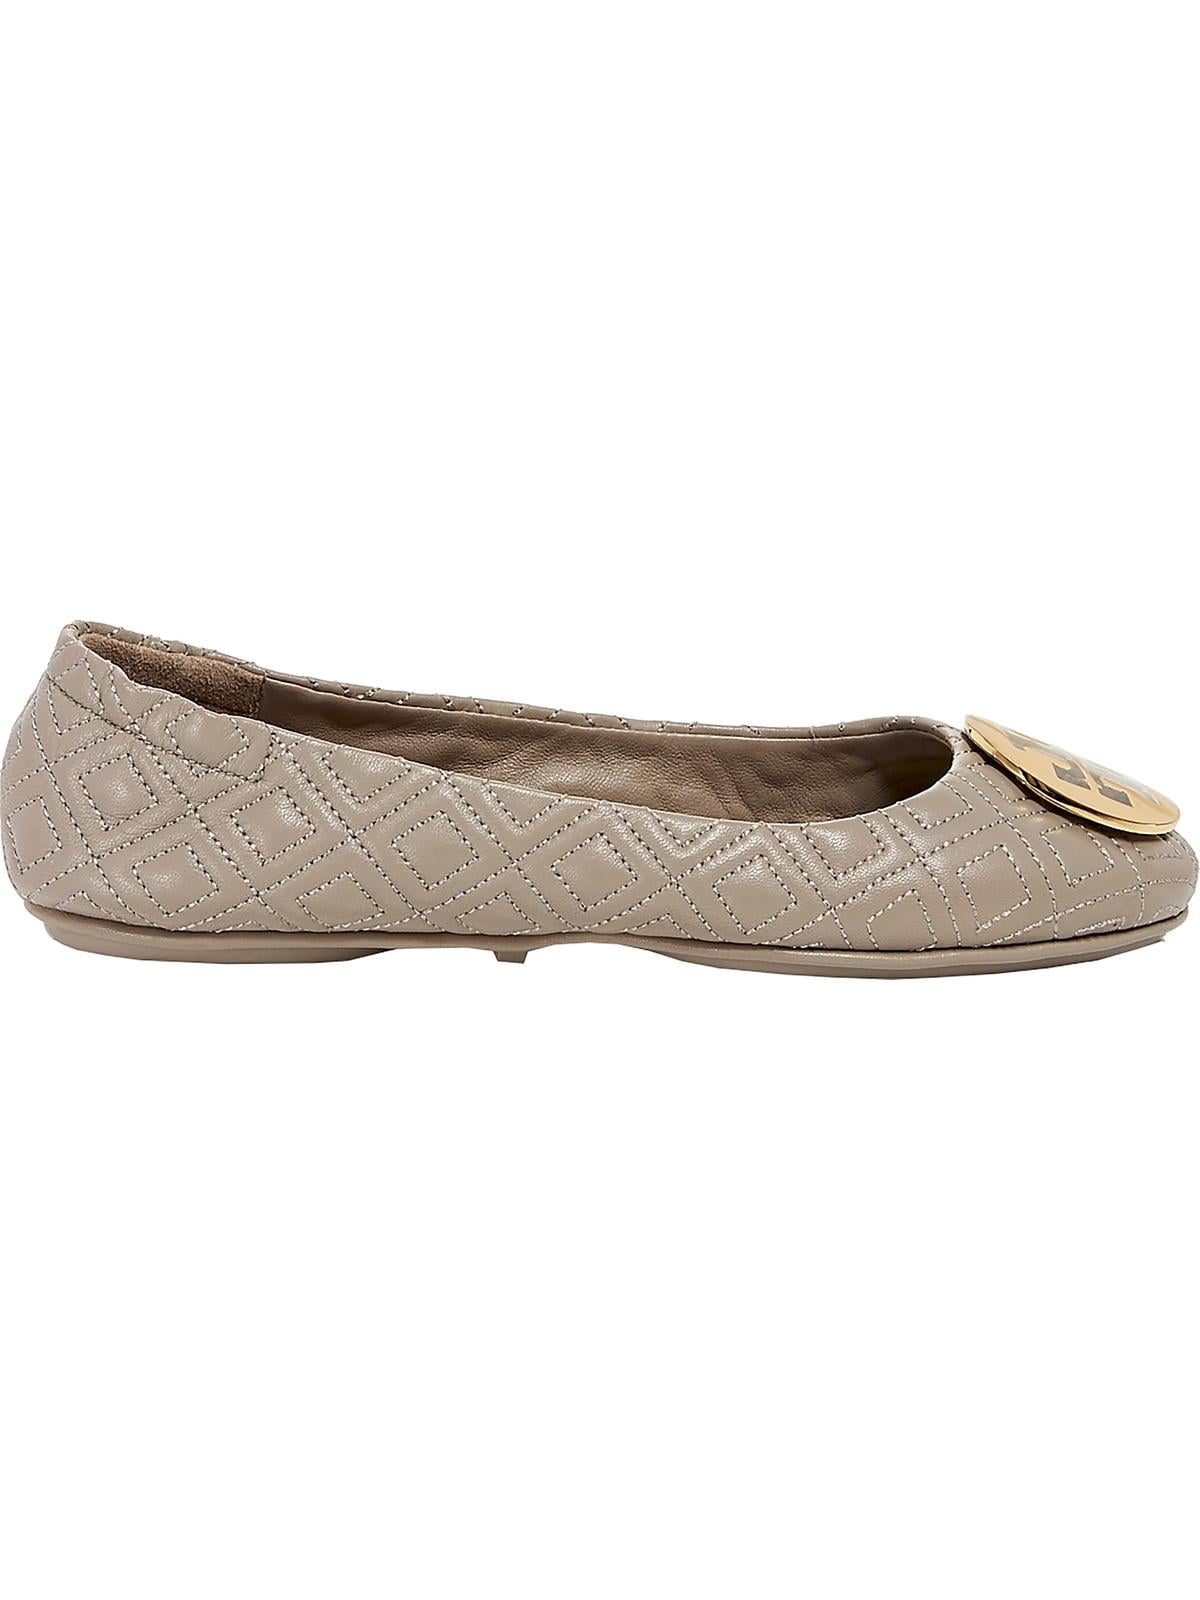 Tory Burch Women's Quilted Minnie Dust Storm / Gold 976 Leather Flat Shoe -  8M 